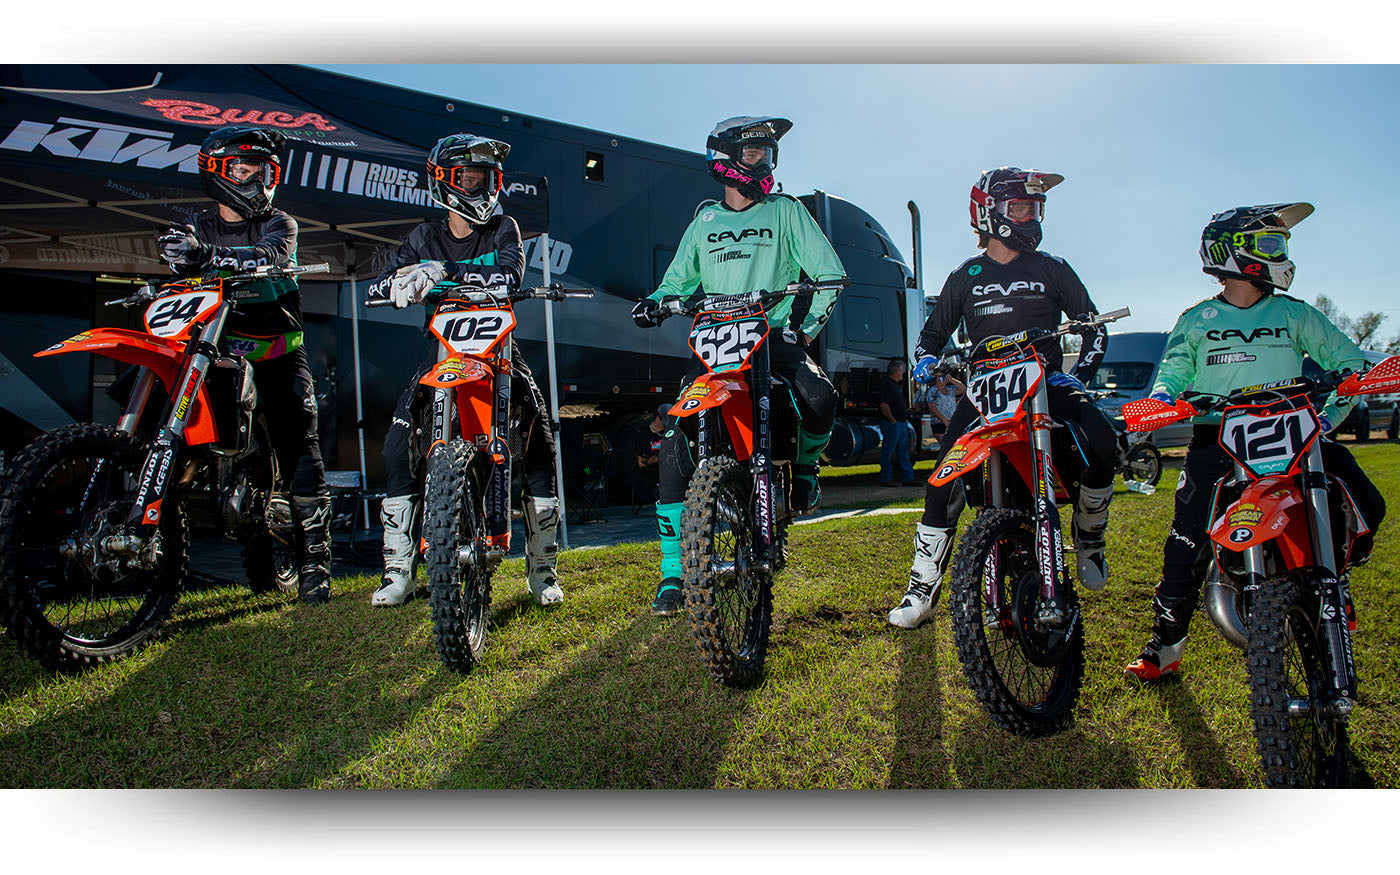 Check out the newly redesigned EVS website! www.evs-sports.com - Motocross  Action Magazine